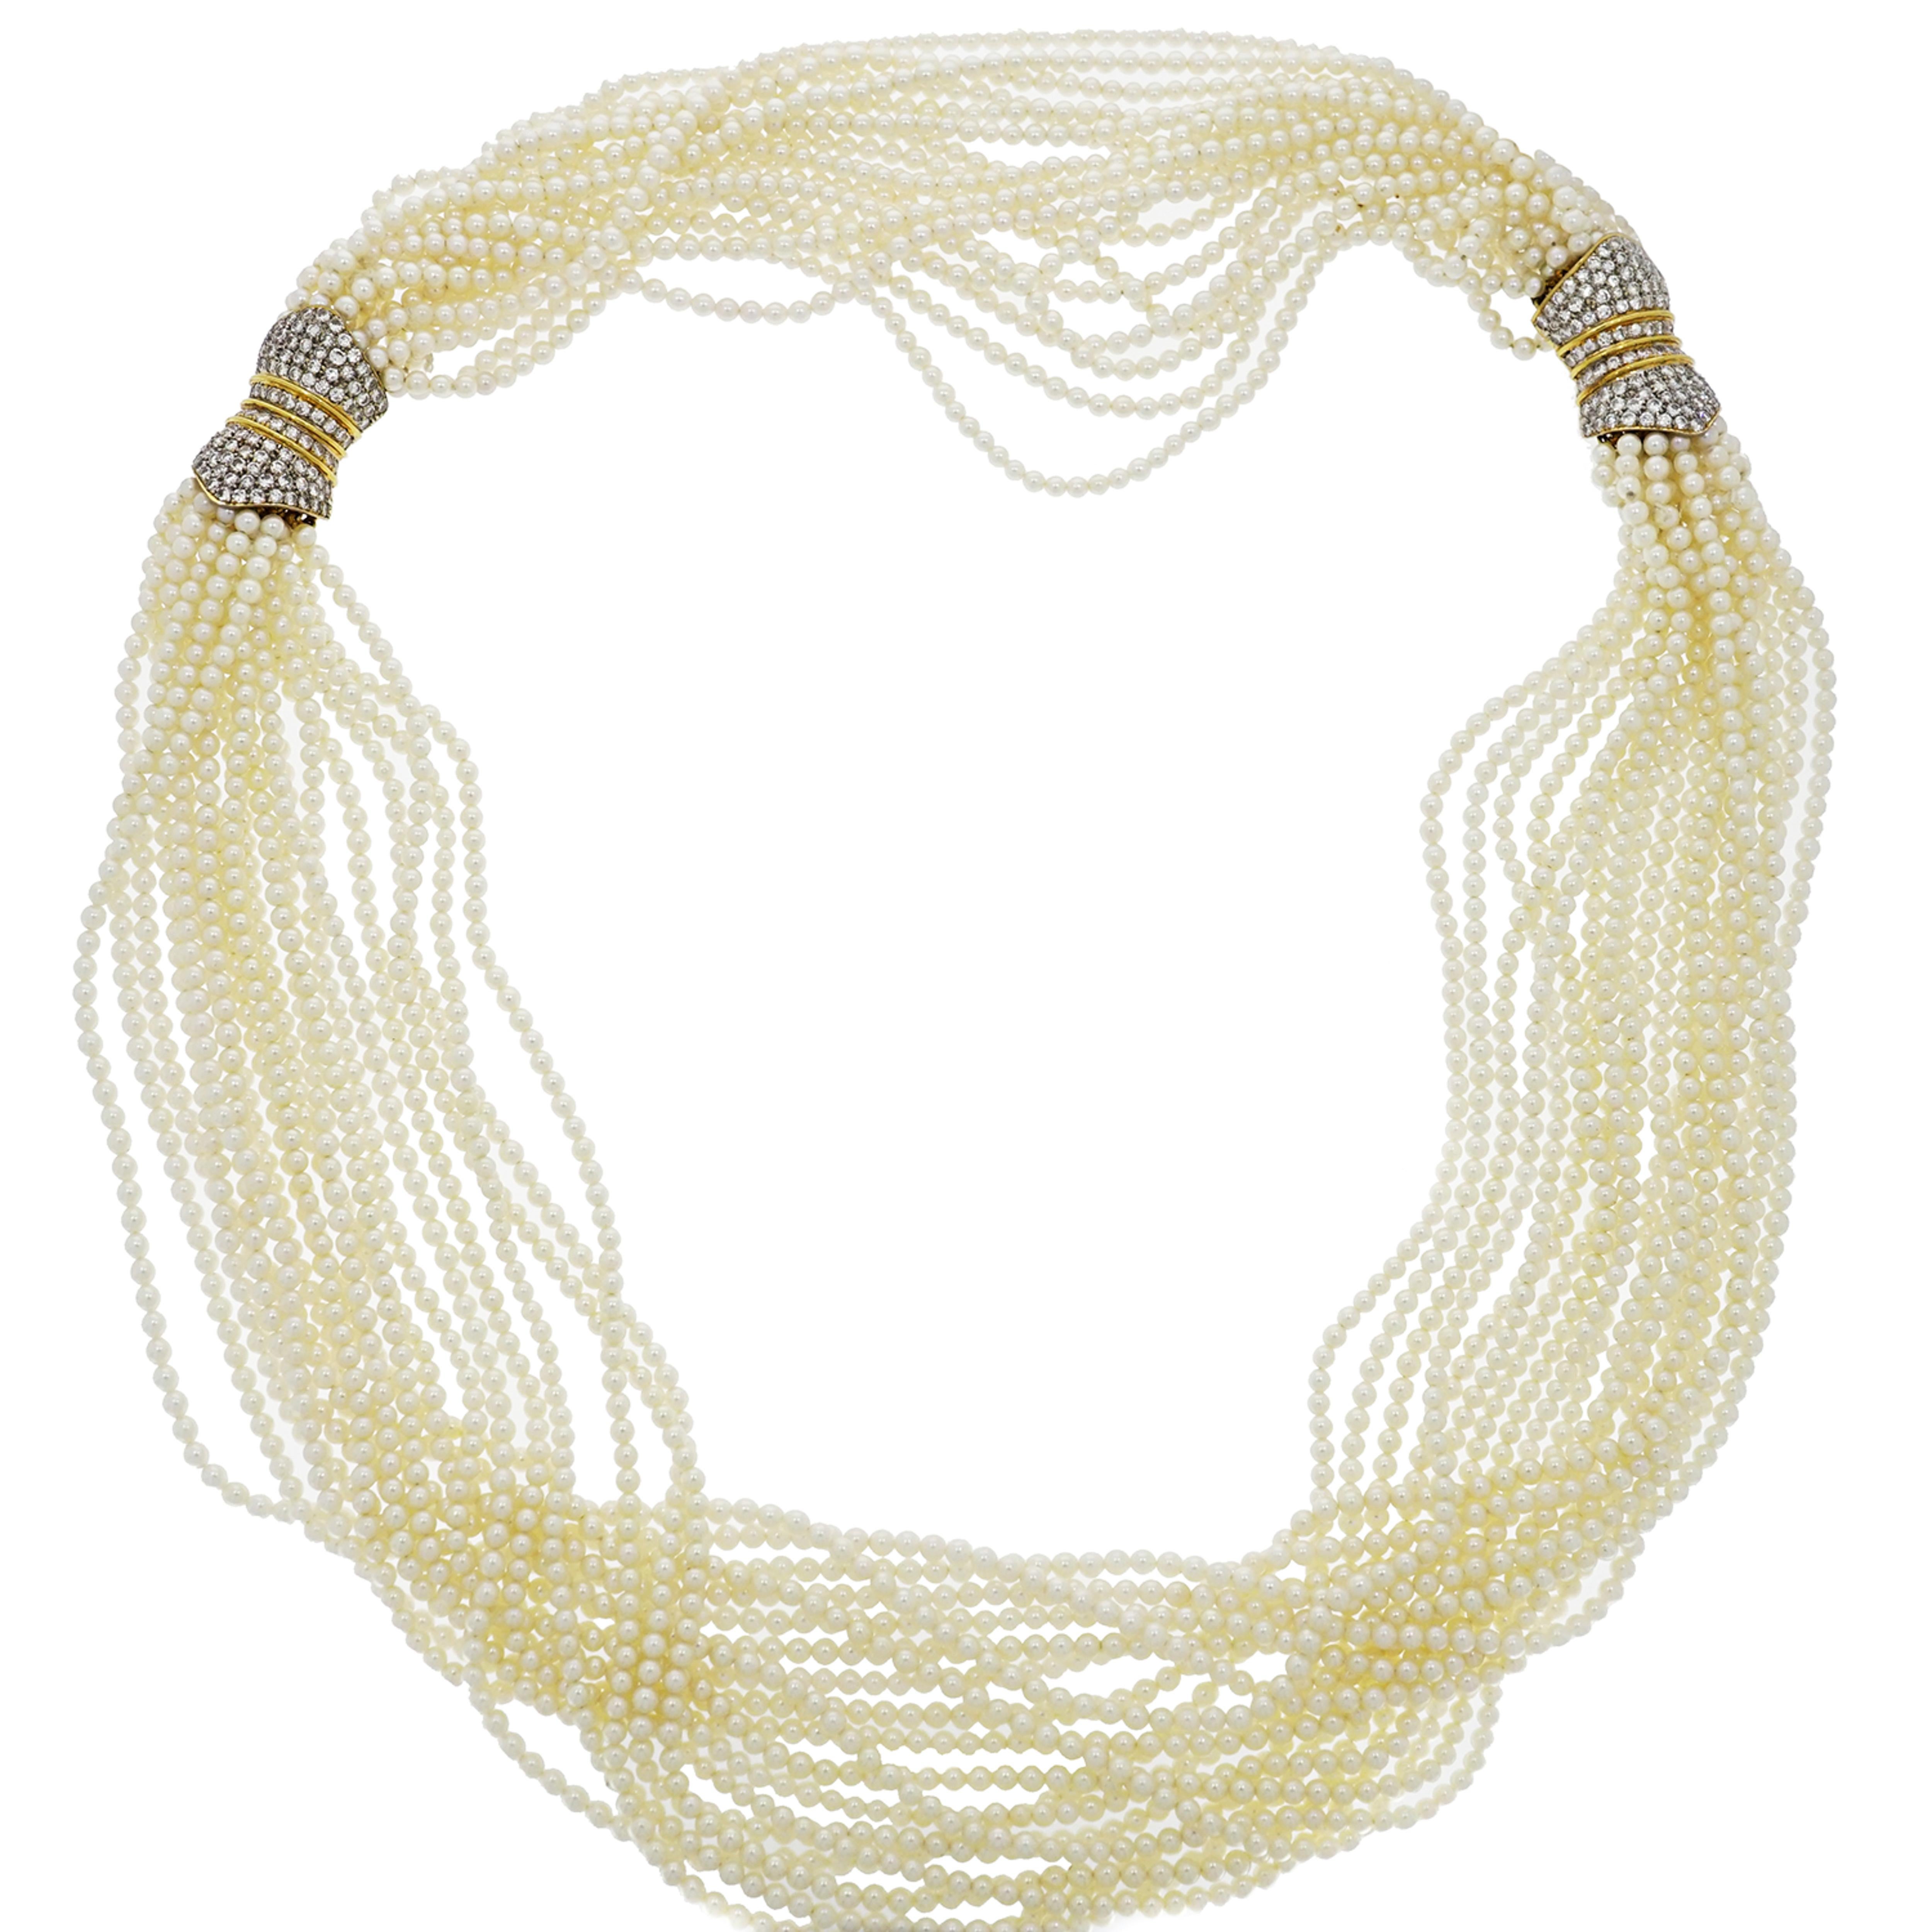 This classic Multi-strand Pearl Necklace features 19 strands of 2.5-3mm Fresh Water Pearls meeting at the unique Diamond crusted Yellow Gold clasp that can be connected with the matching bracelet. Giving you more options to wear it in different